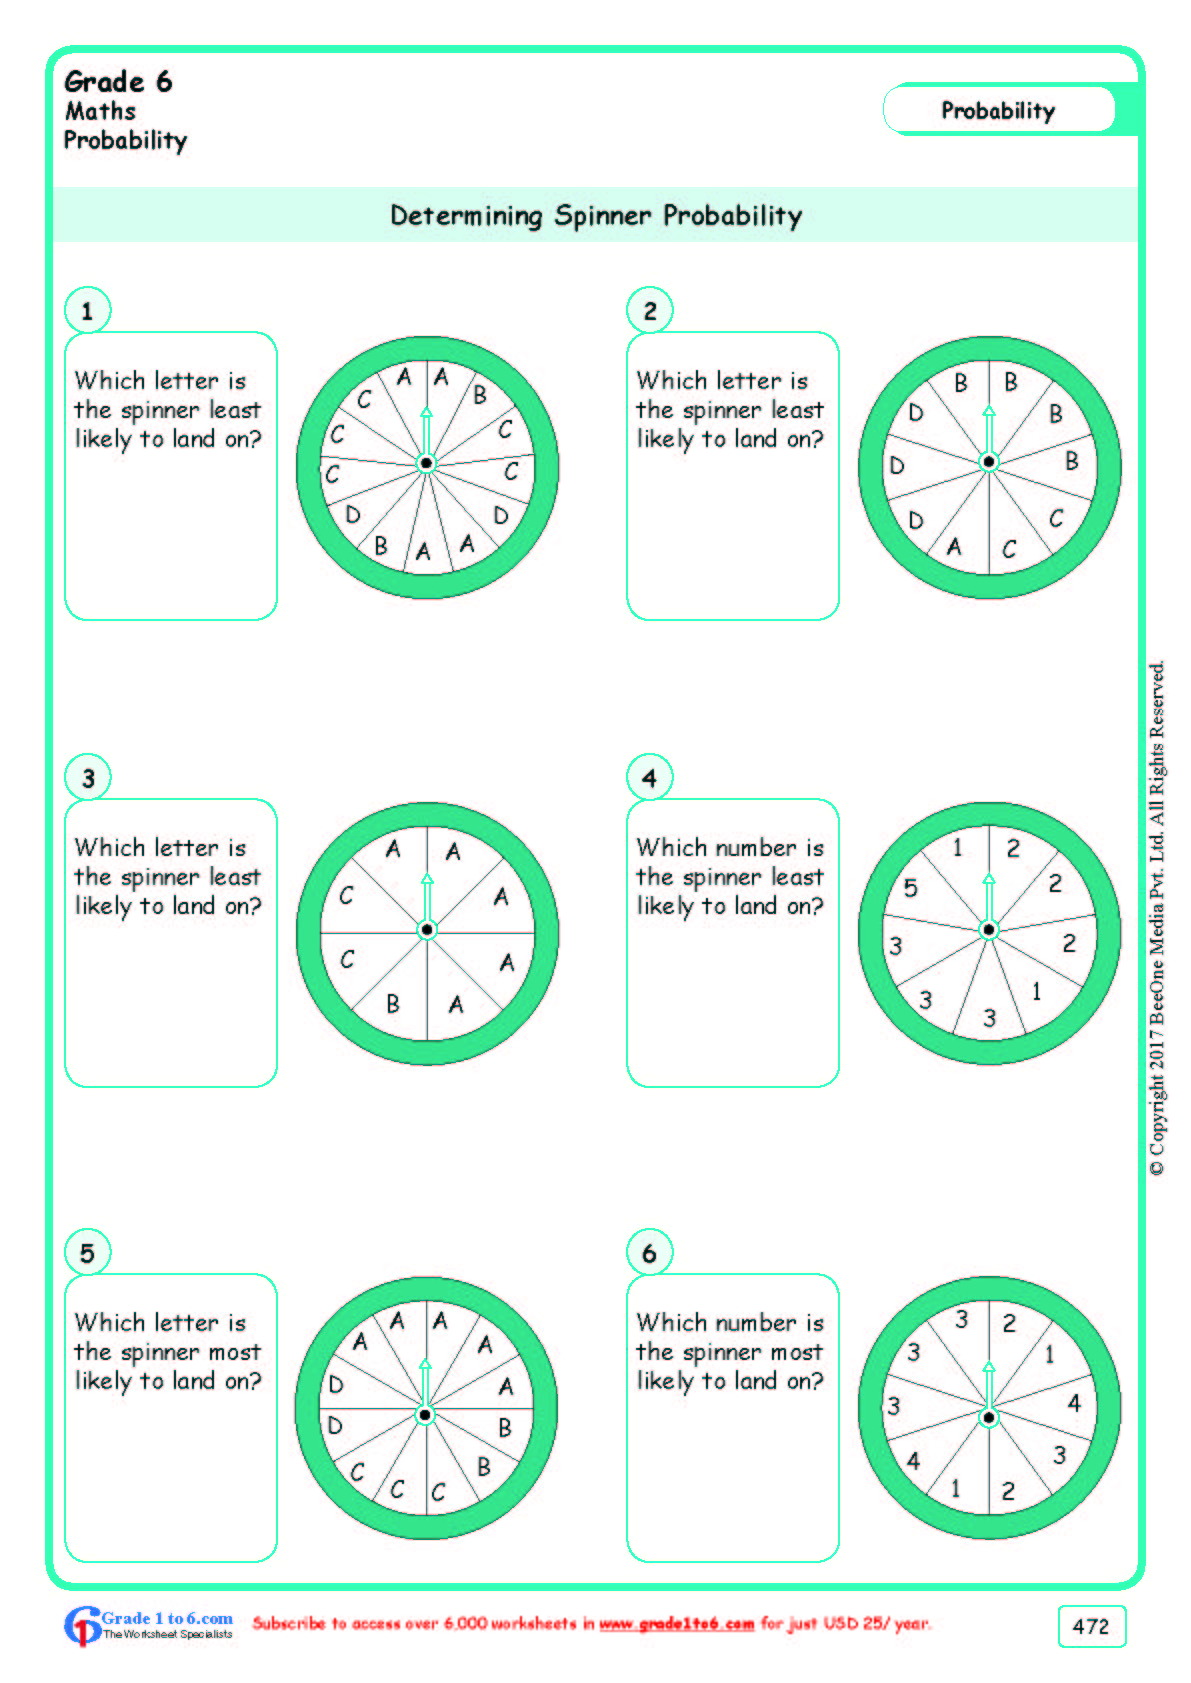 Determining Probability Worksheets|www.grade1to6.com